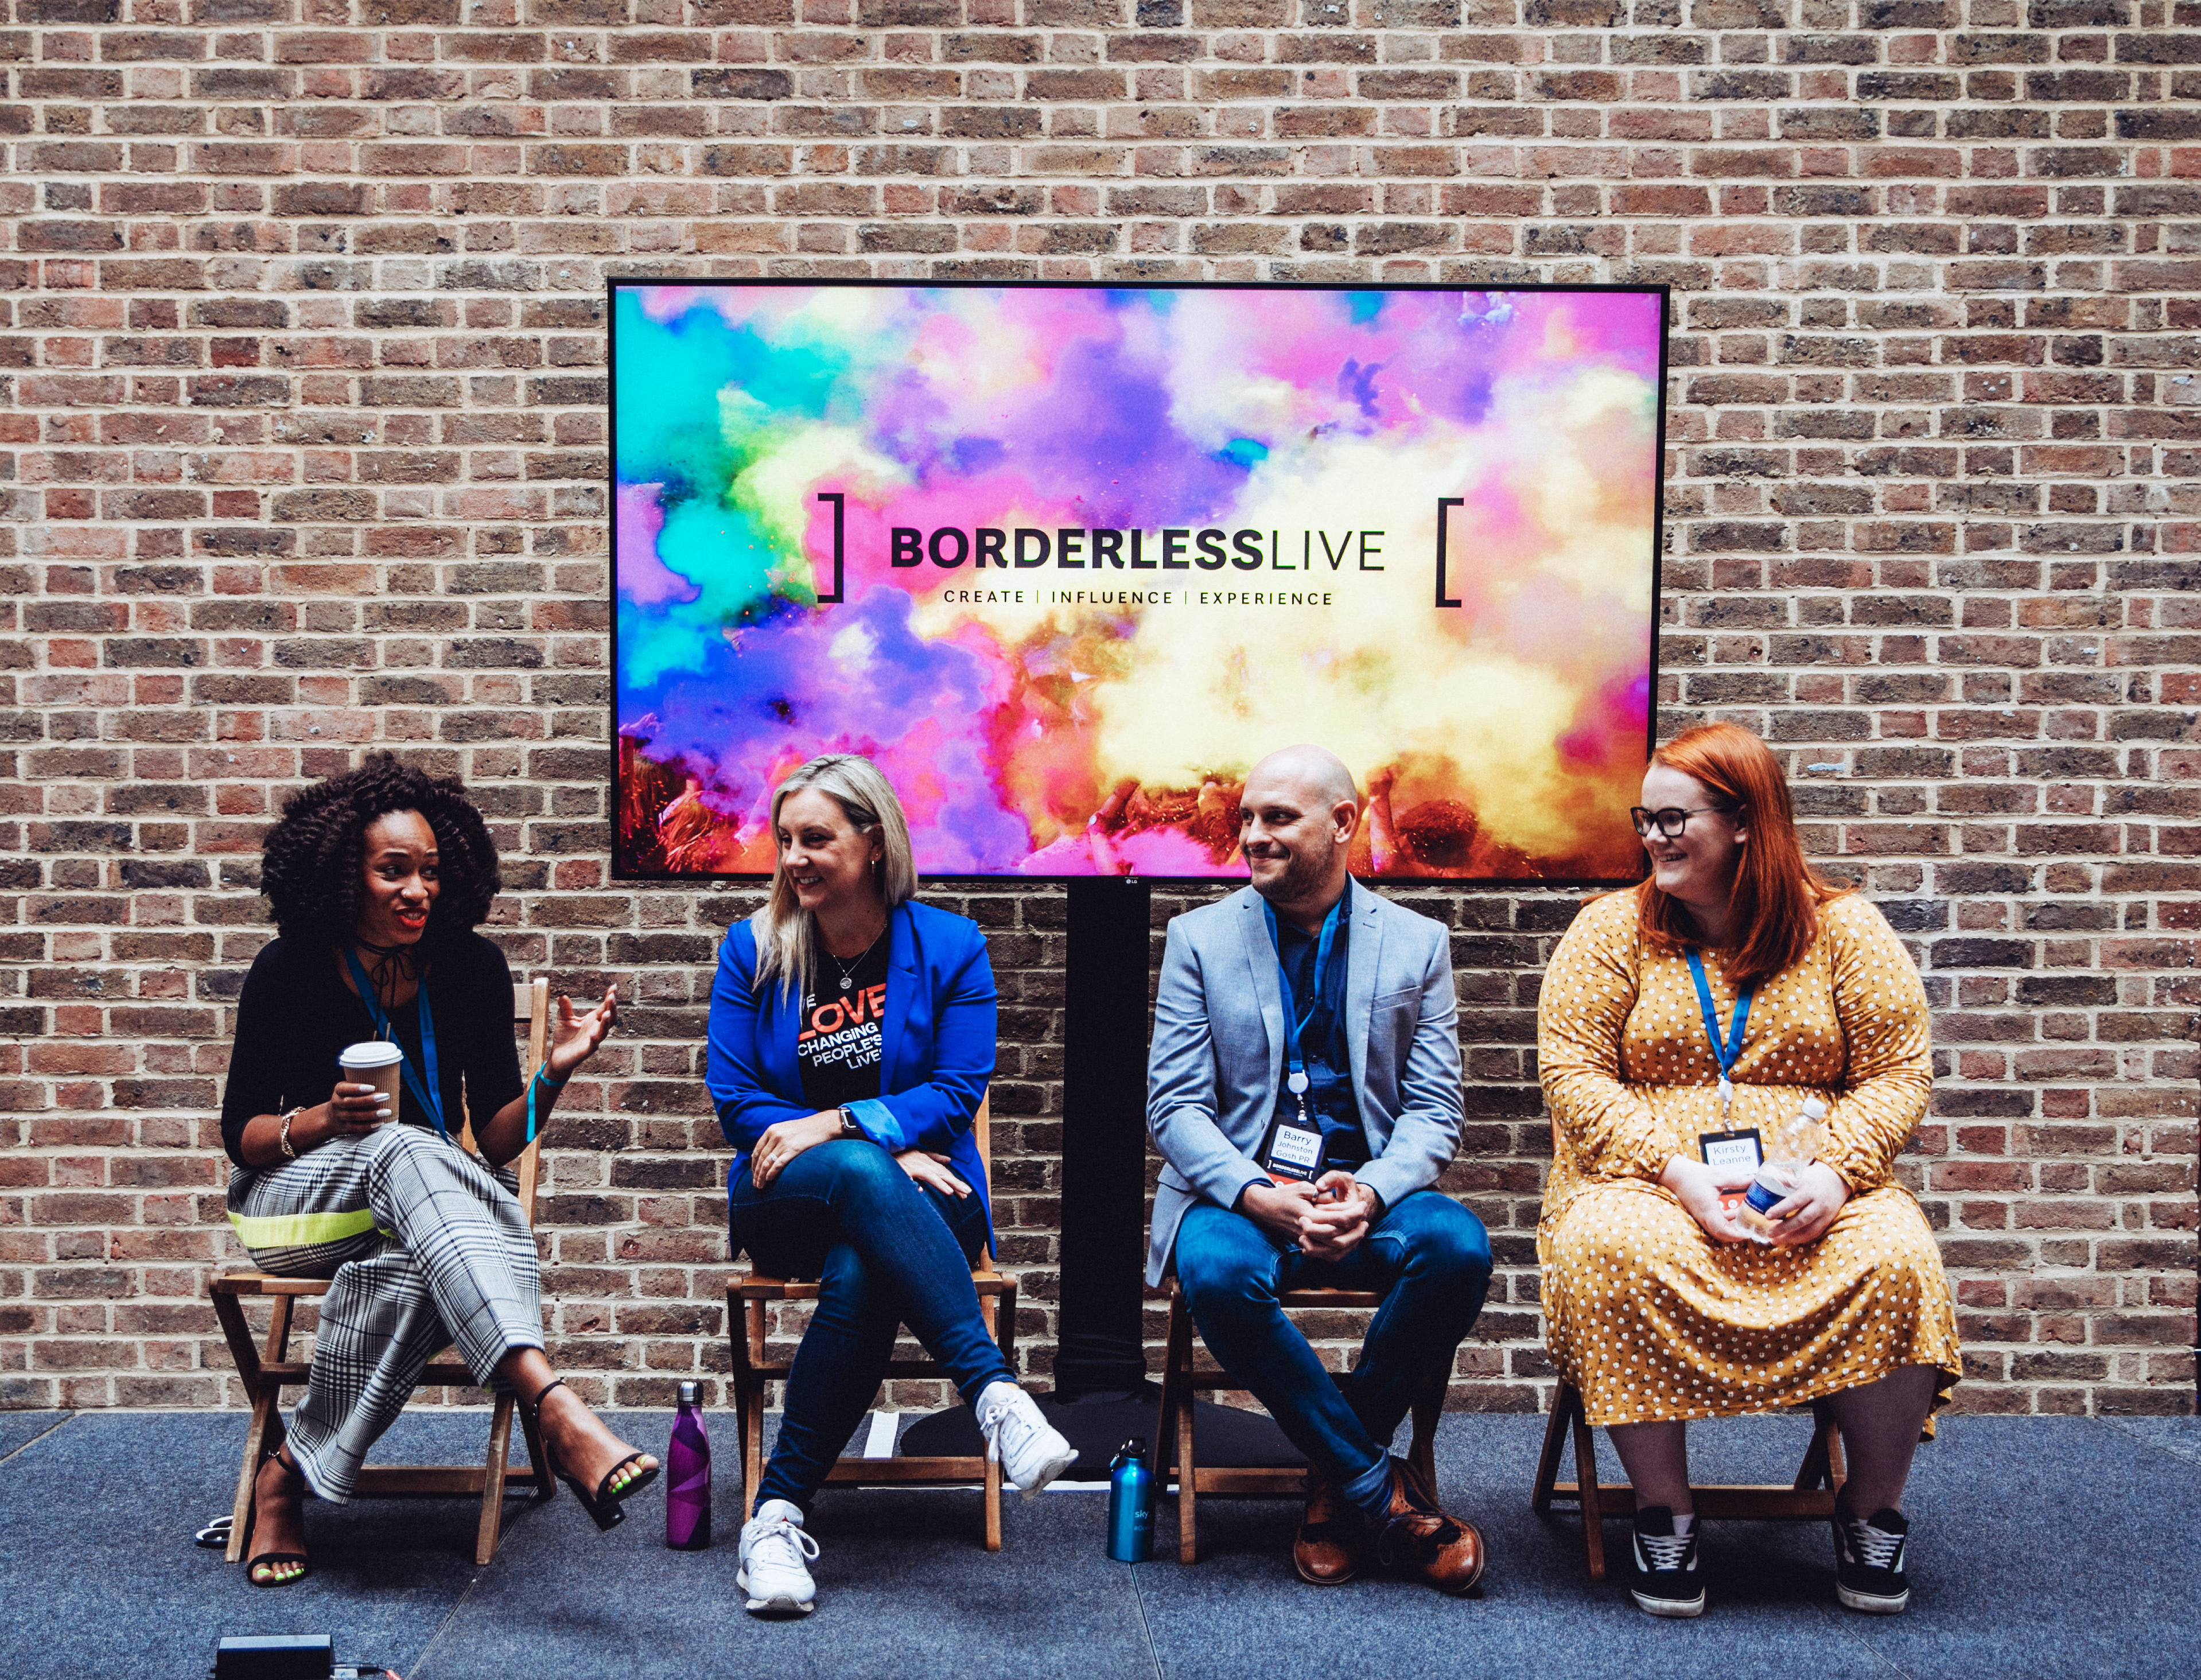 Talking Travel and Influencers at BorderlessLive